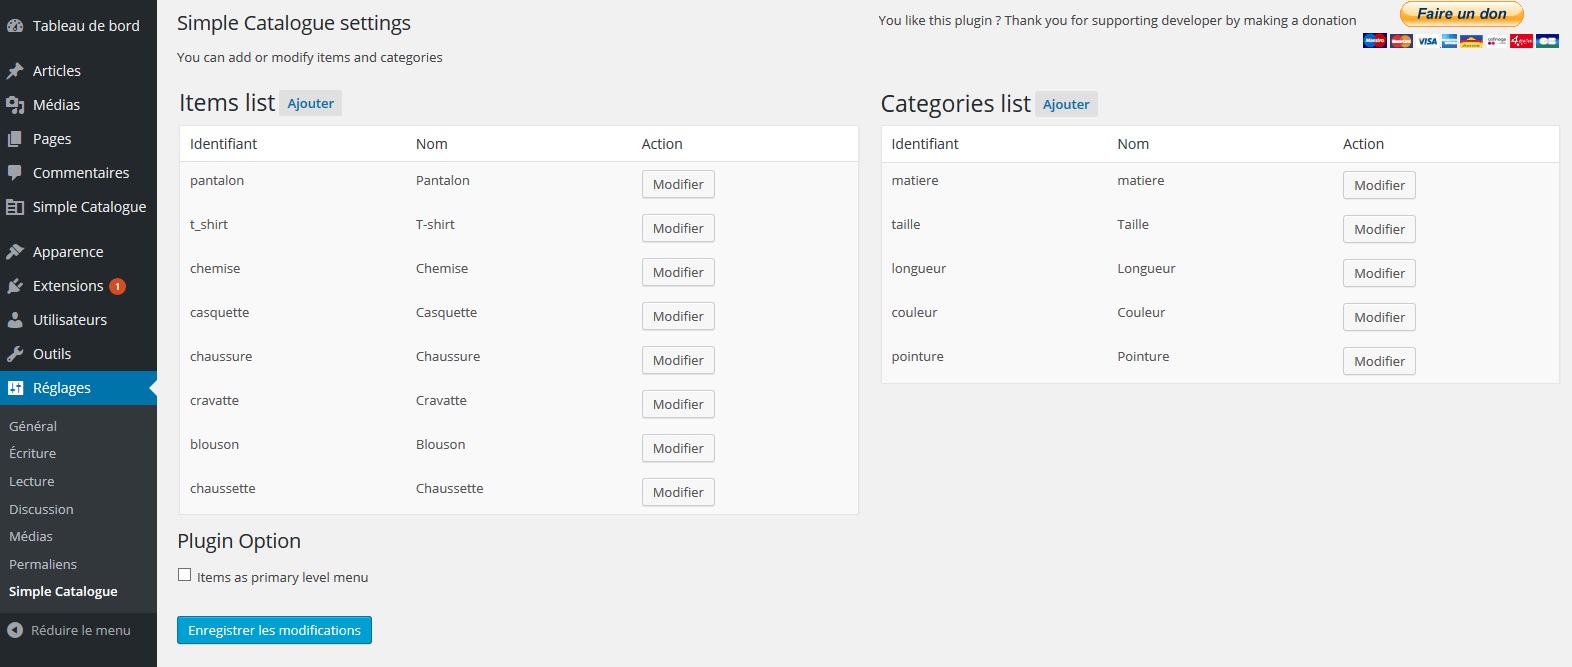 Main settings page, you can add items and manage it. Note option are available here (only one for the moment)